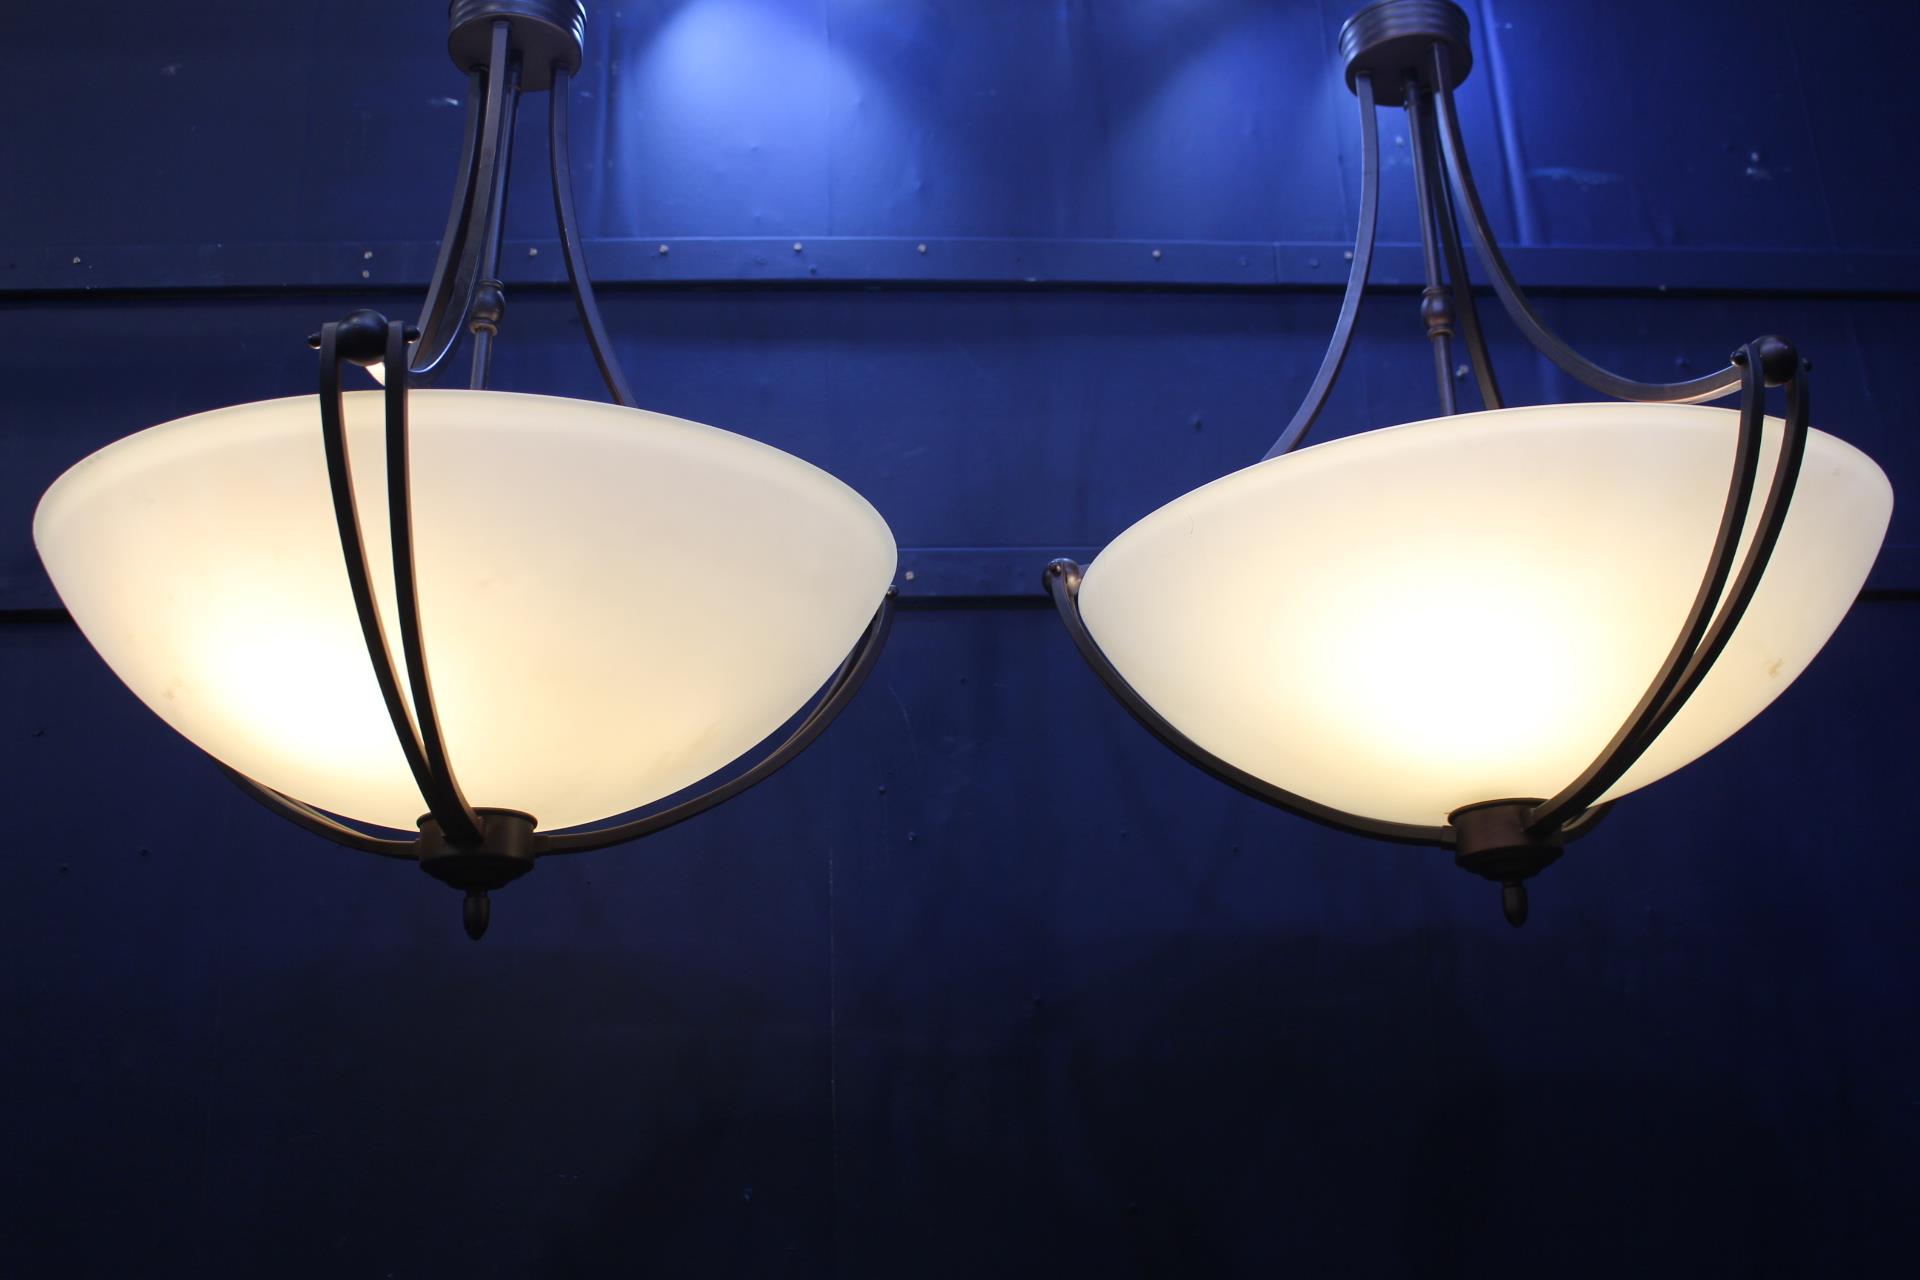 Pair of bronze hanging light with alabaster shades {H 100cm x Dia 56cm}. - Image 2 of 3